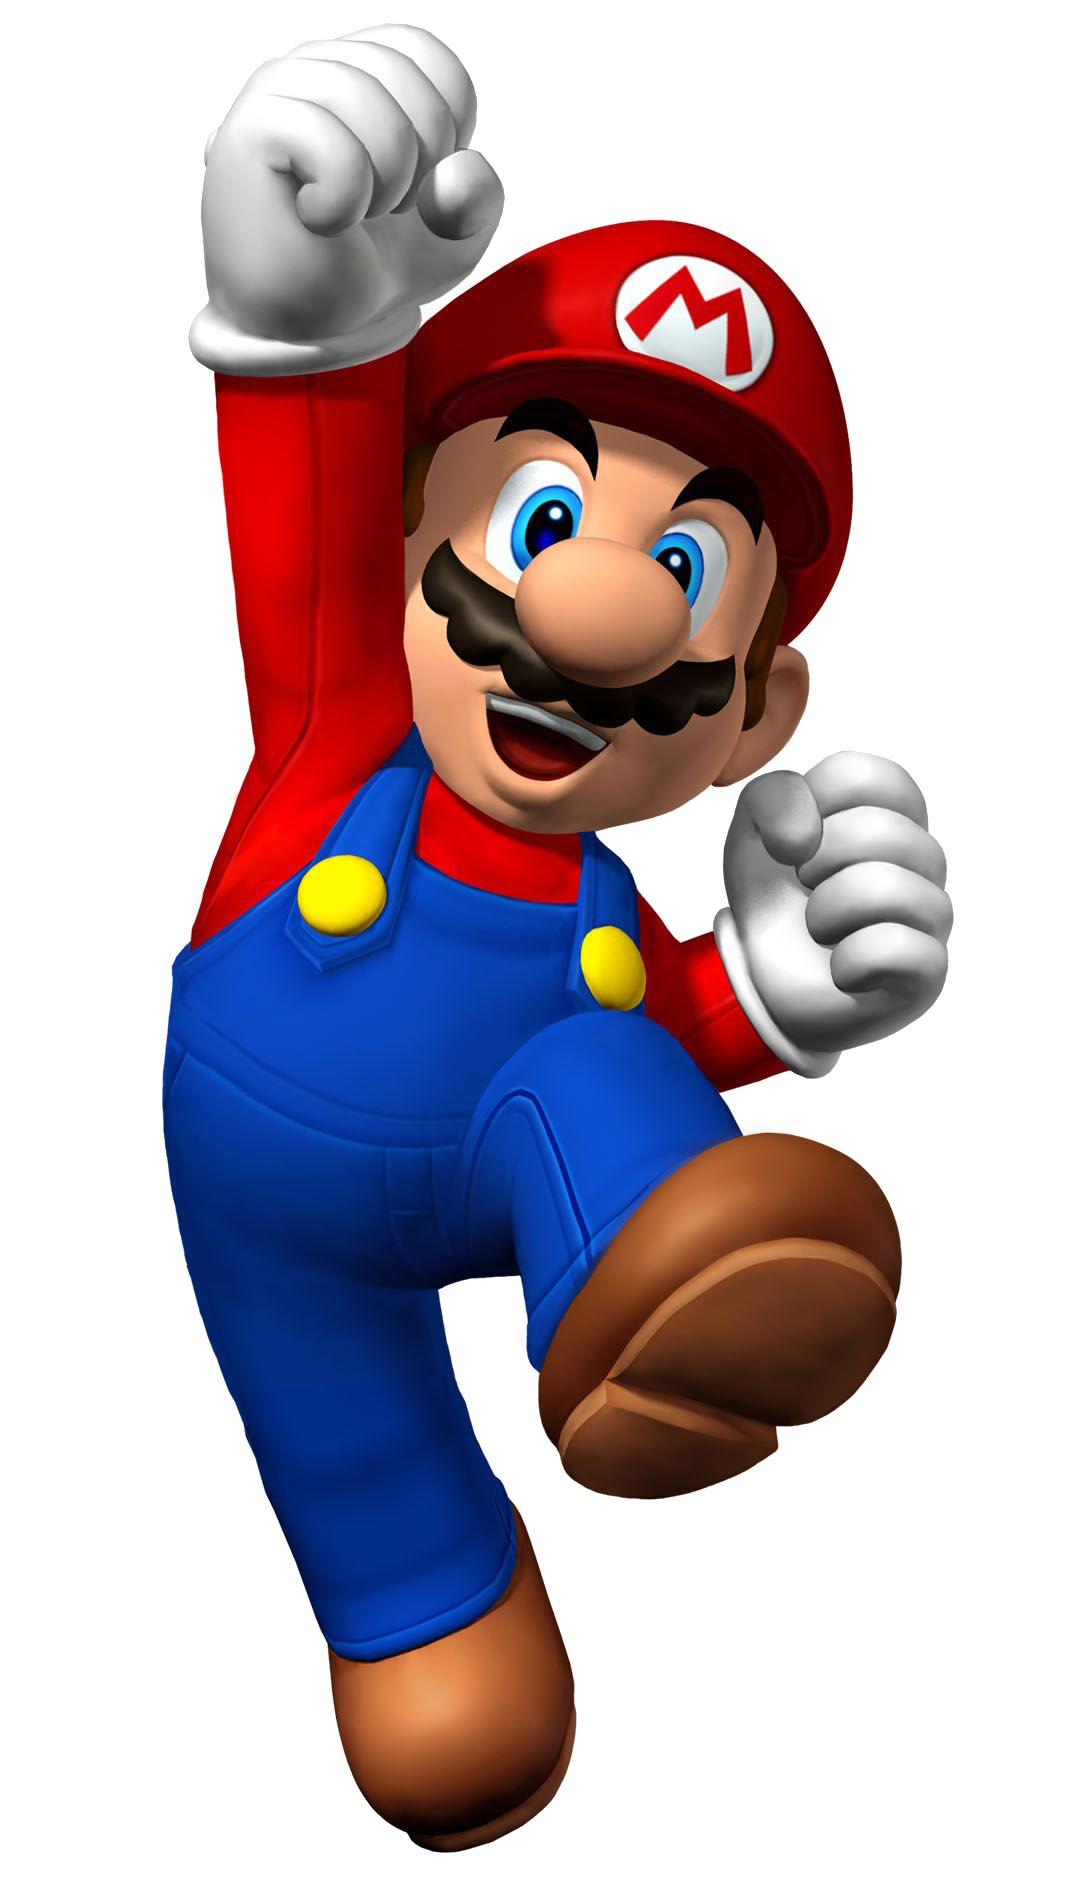 Mario - The Super Gaming Wiki